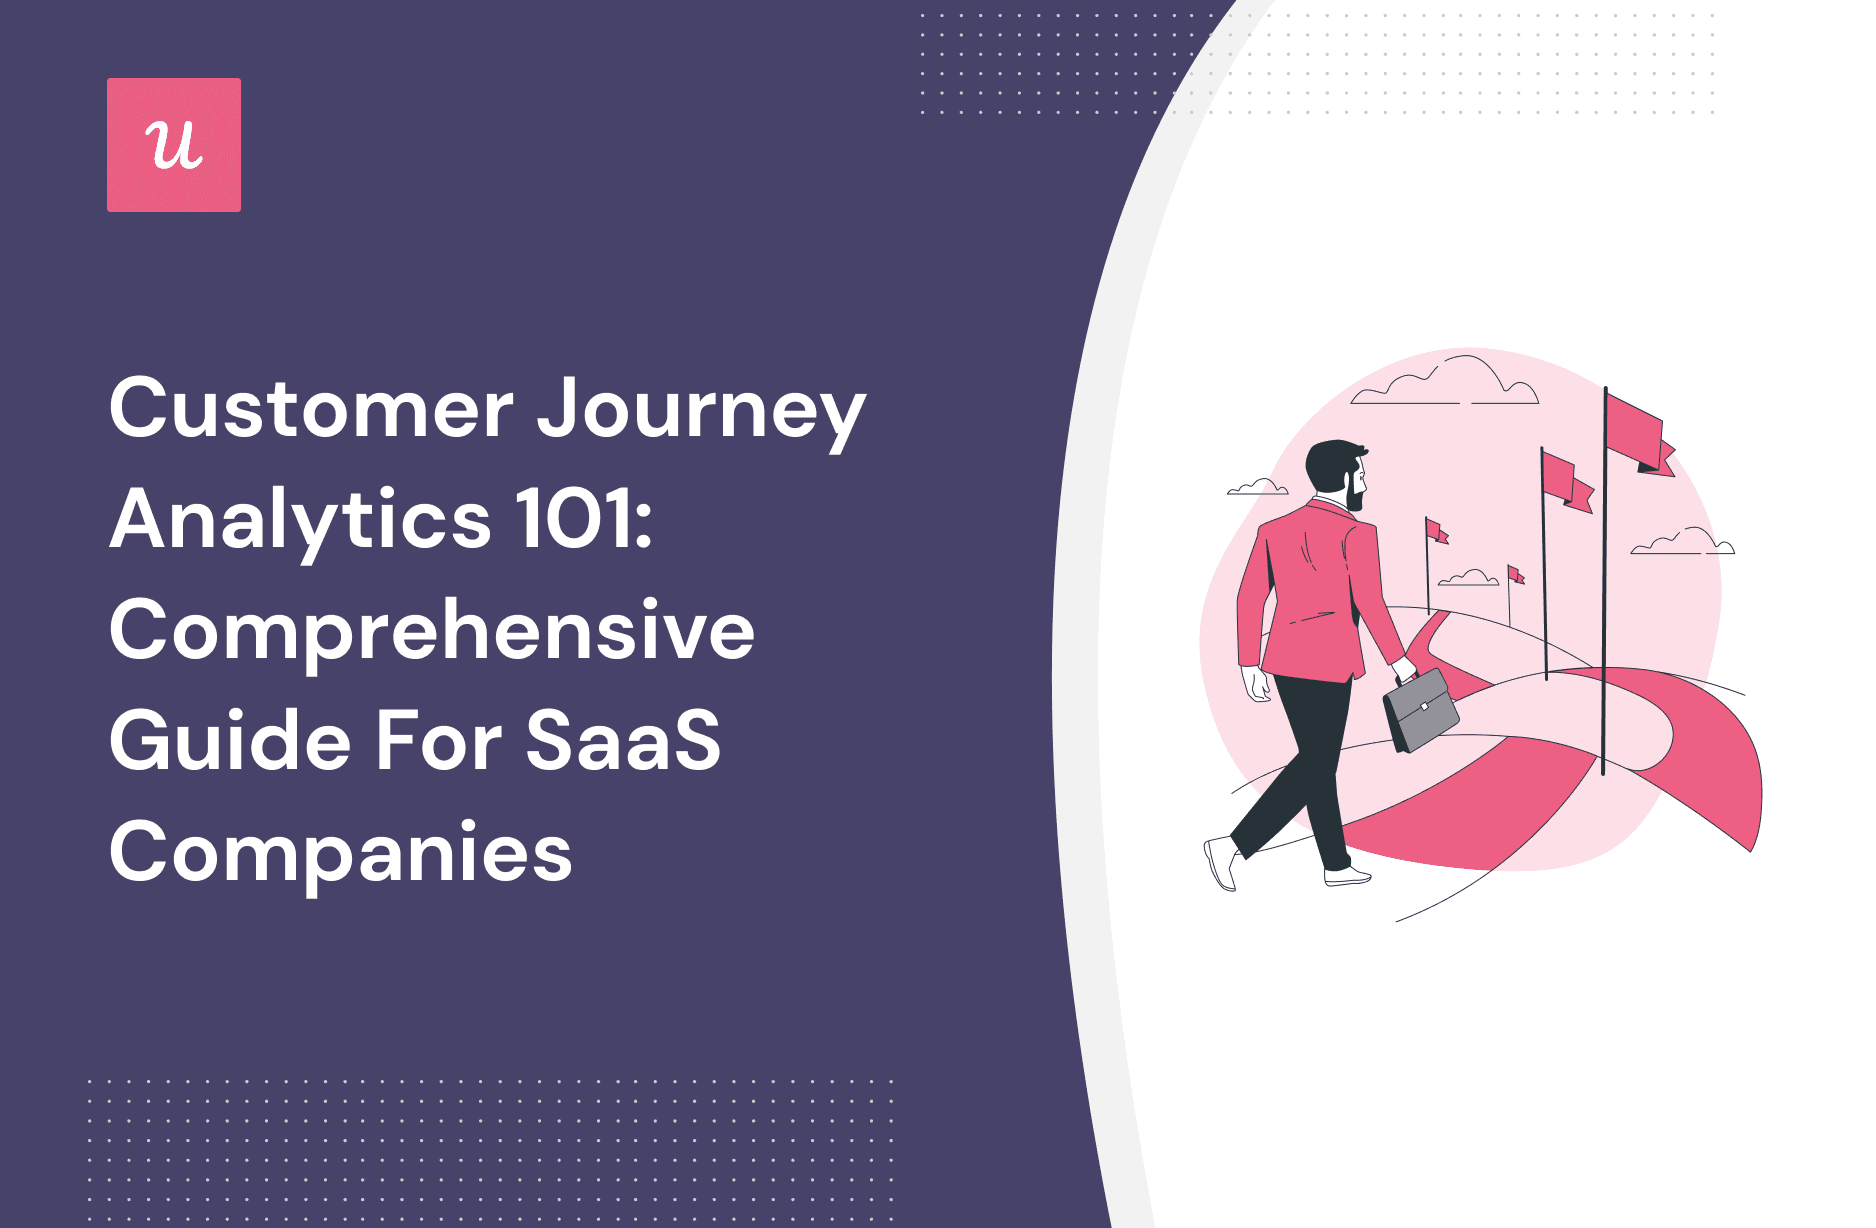 Customer Journey Analytics 101: Comprehensive Guide for SaaS Companies cover